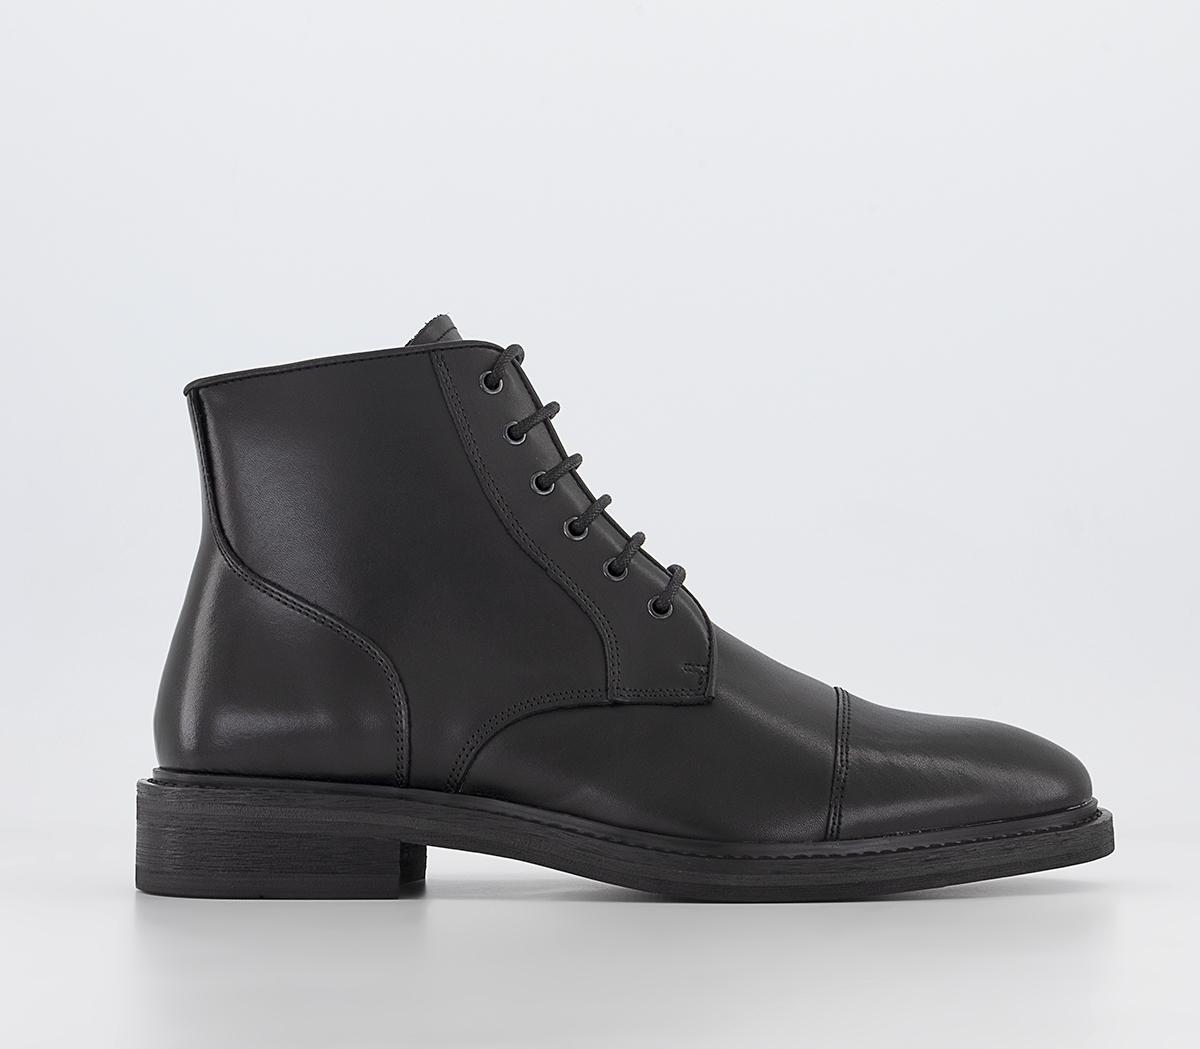 OFFICE Barnsley Toecap Ankle Boots Black Leather - Men’s Boots